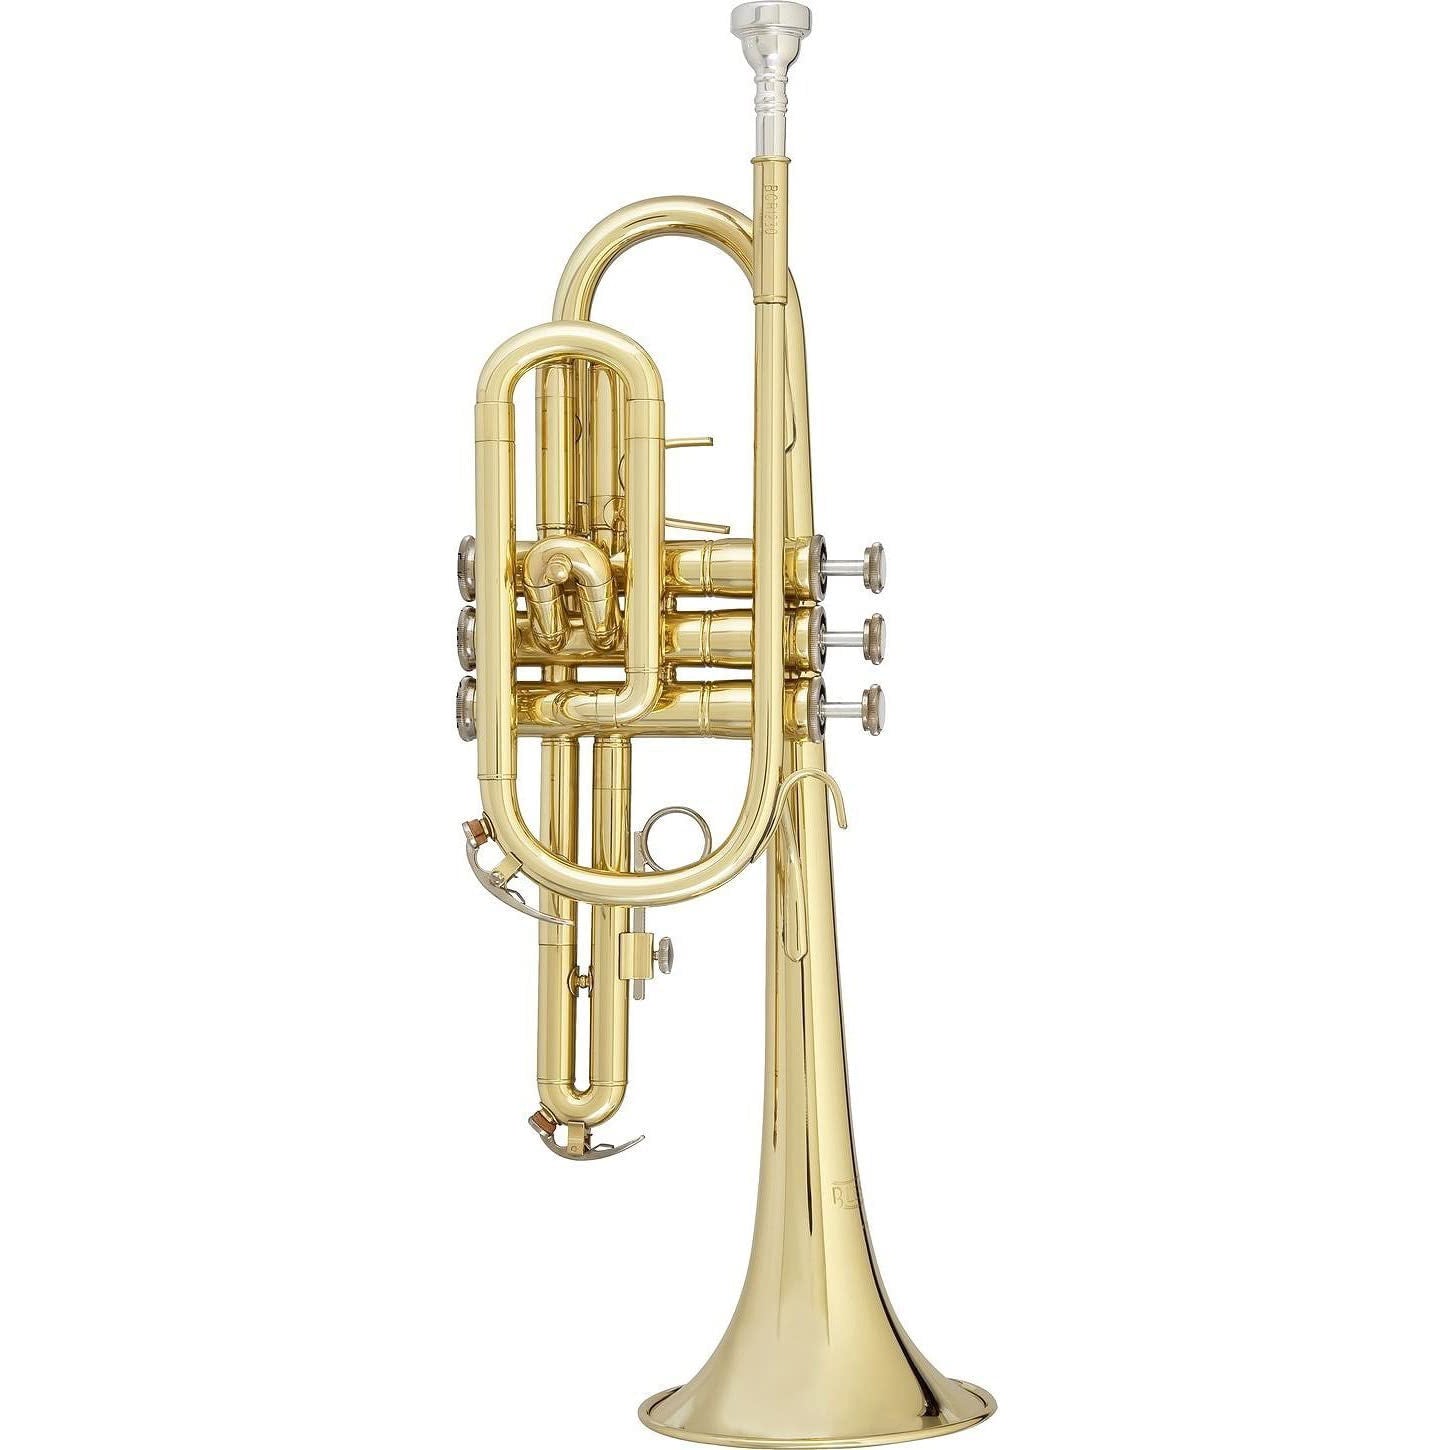 Blessing BCR-1230 Student Cornet Lacquered Brass – Alto Music